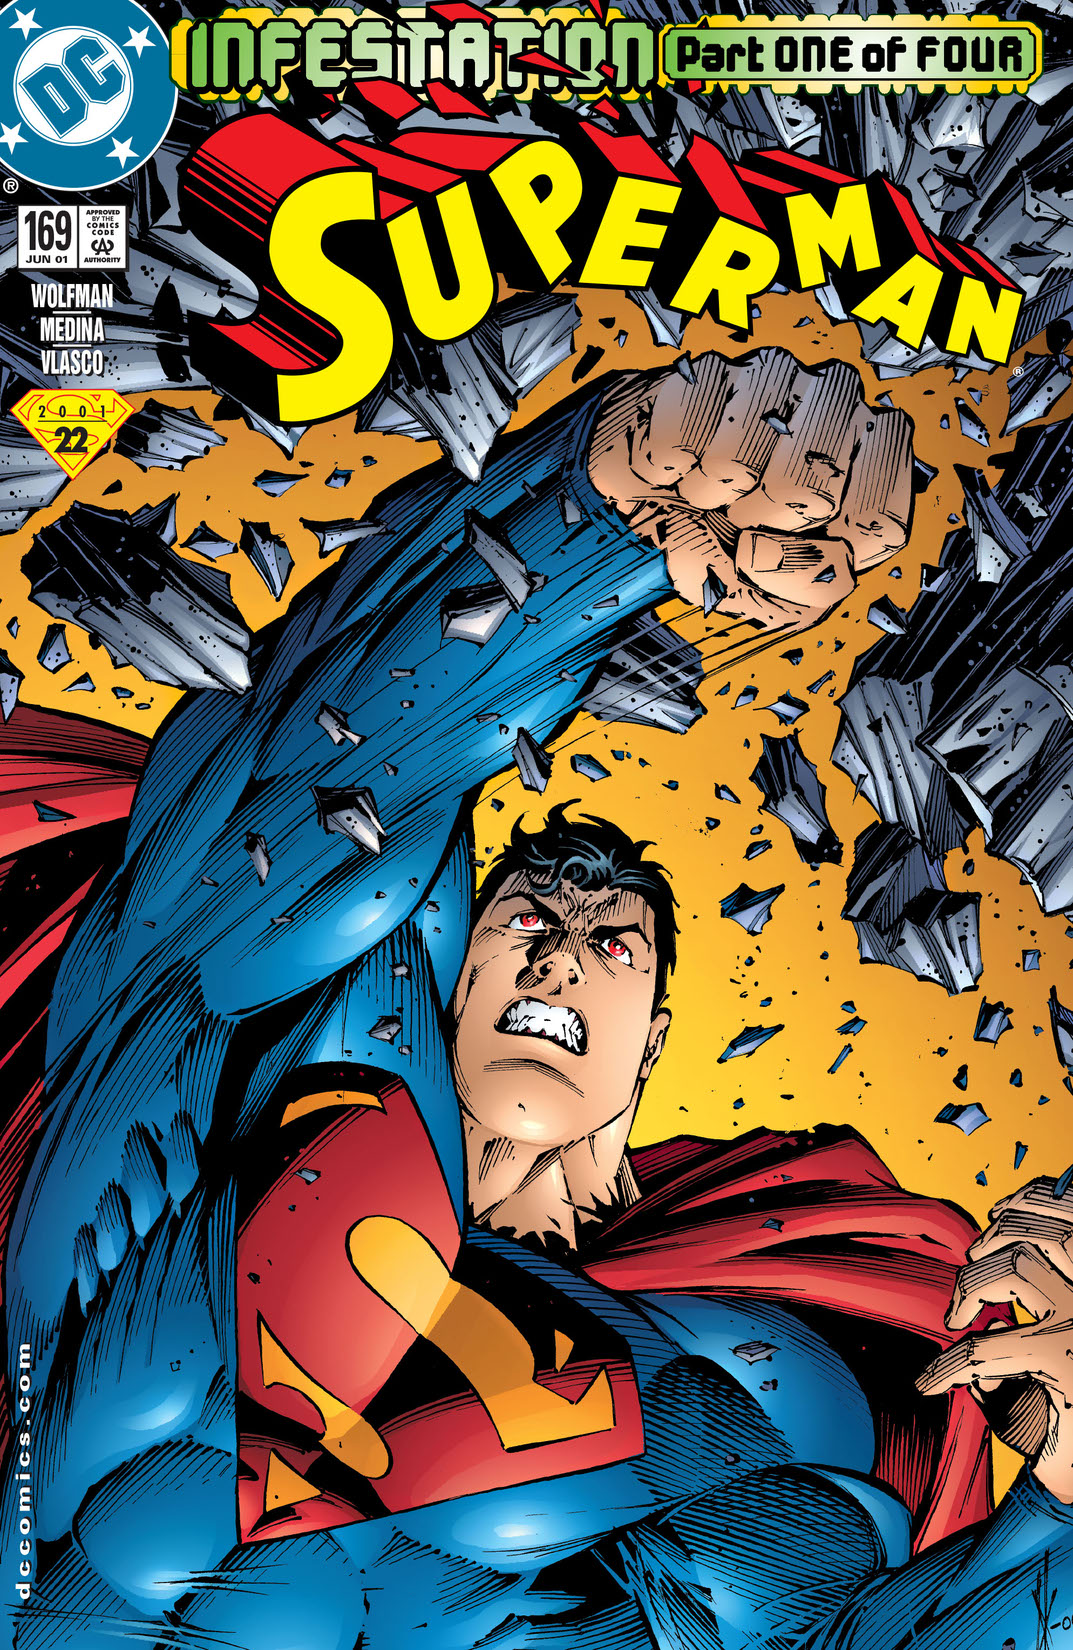 Superman (1986-2006) #169 preview images